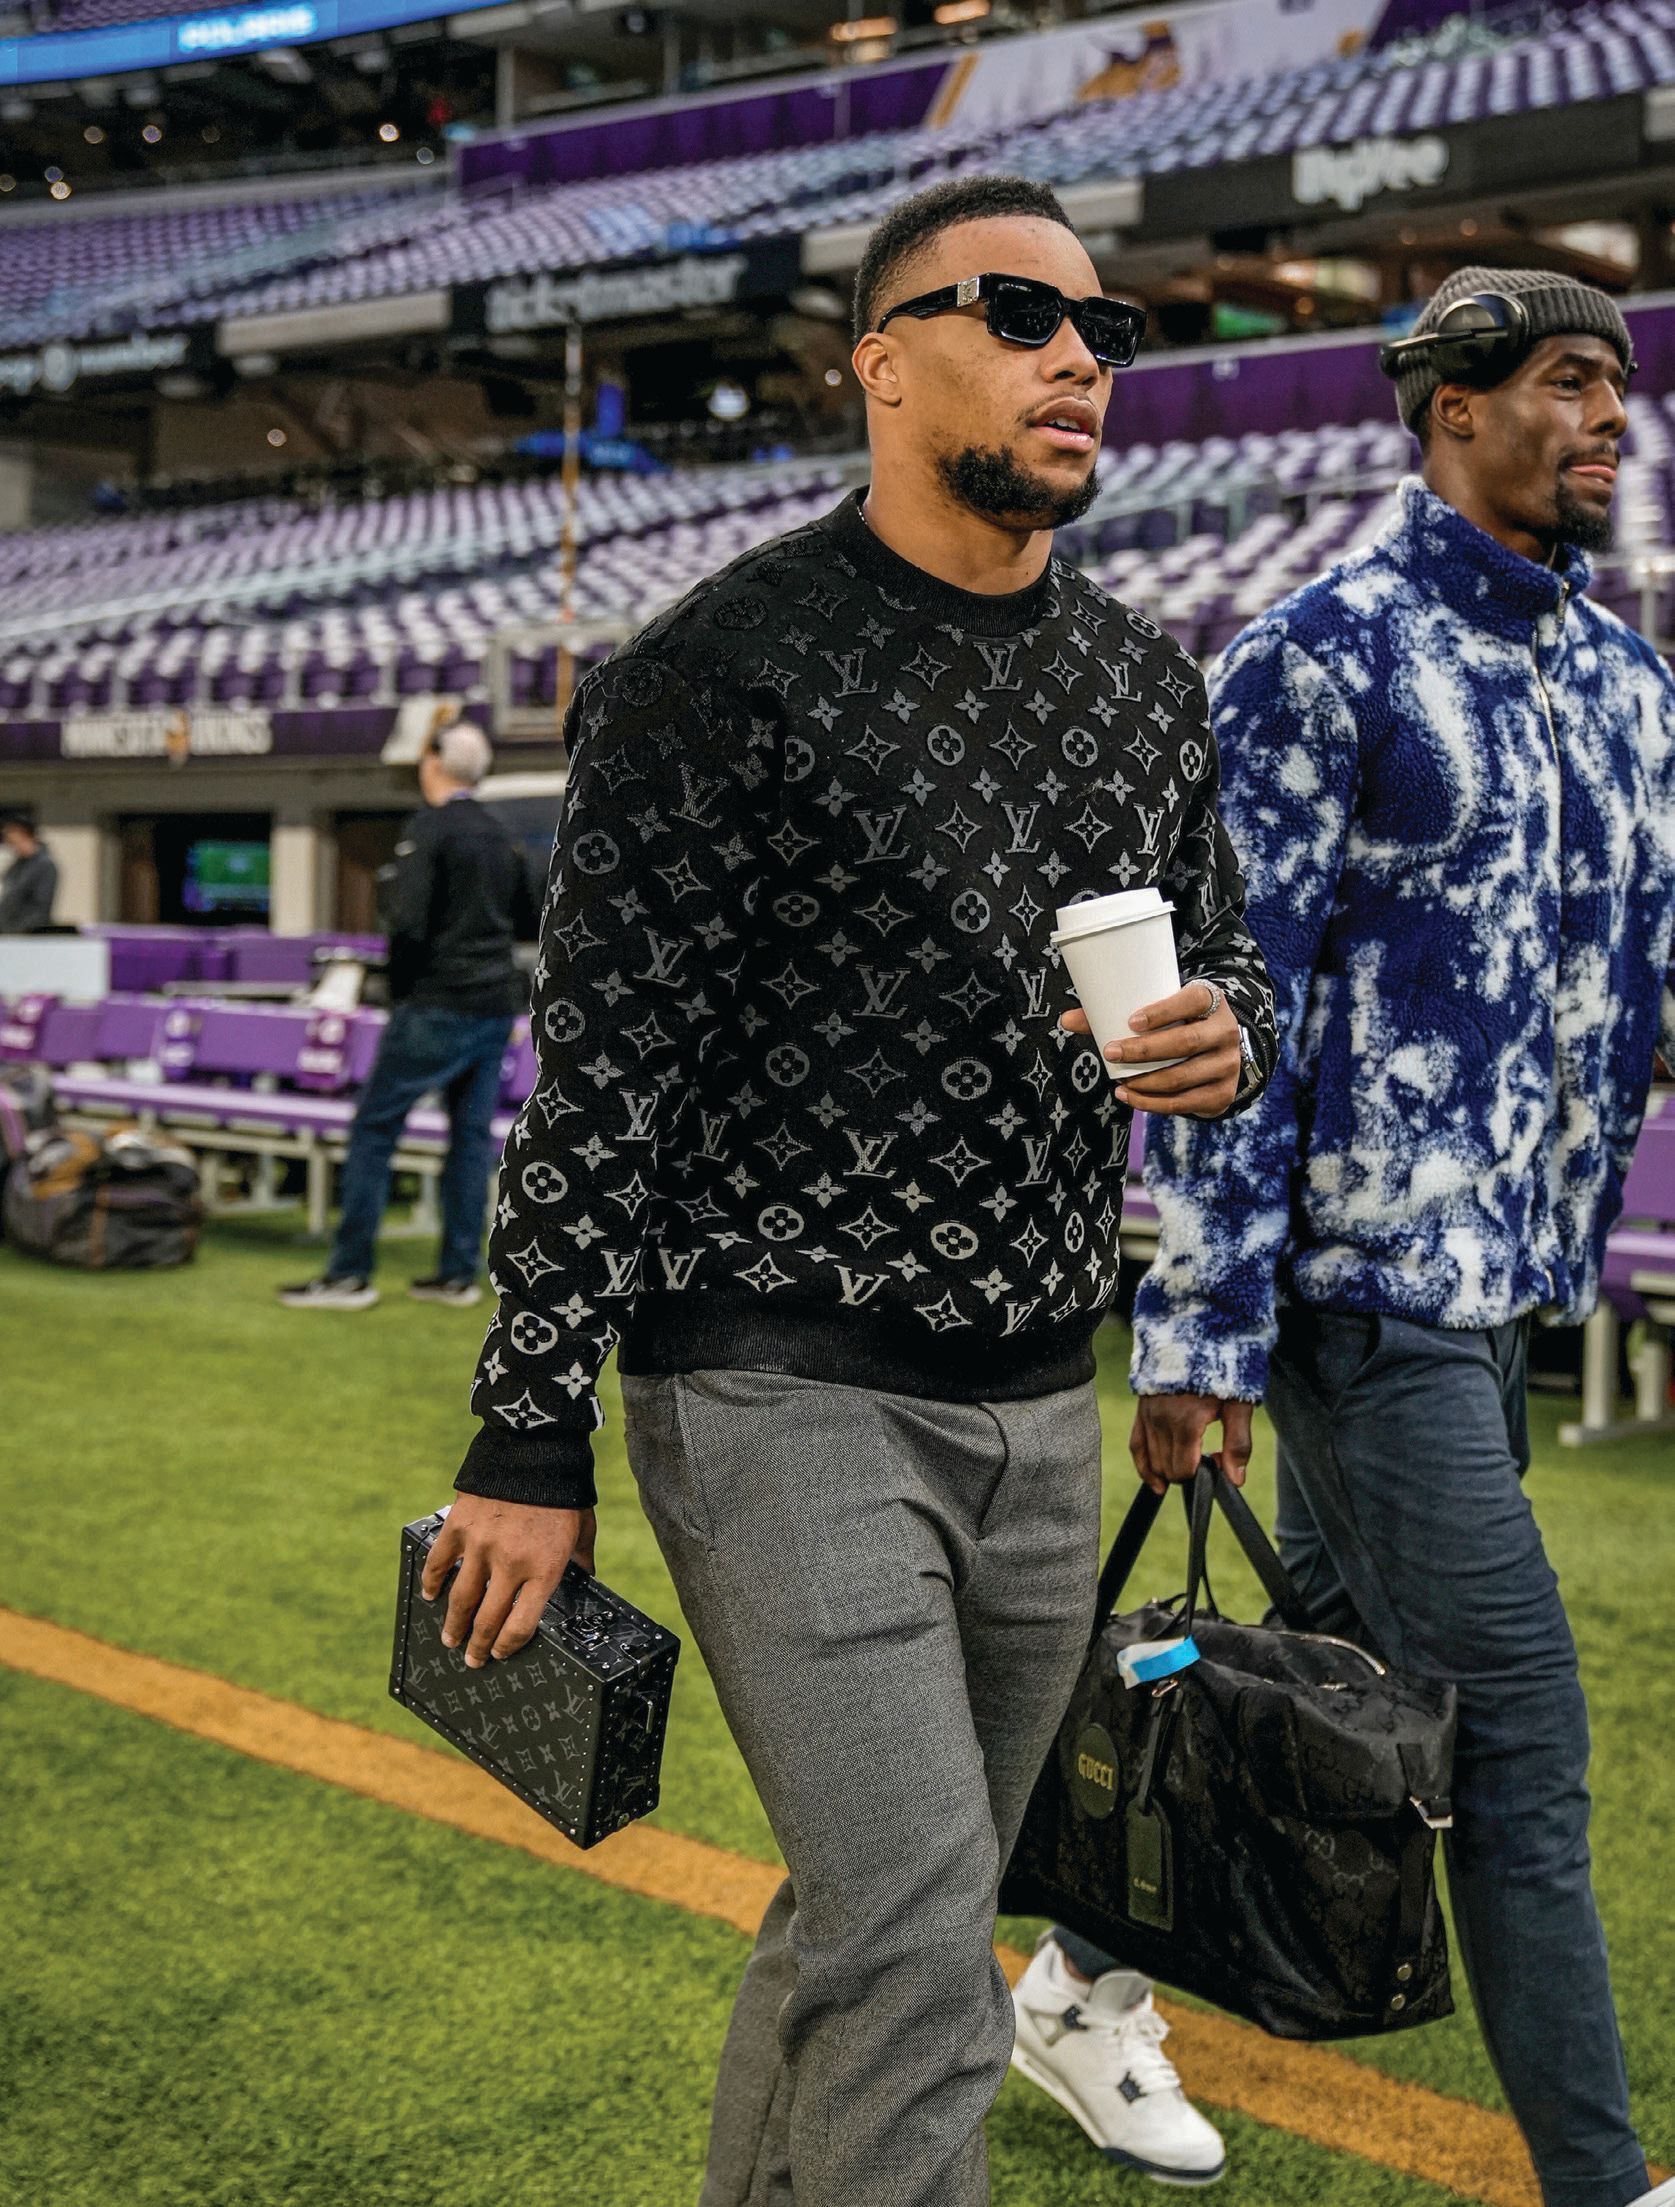 Saquon Barkley decked out in Louis Vuitton on the field PHOTO COURTESY OF THE NEW YORK GIANTS